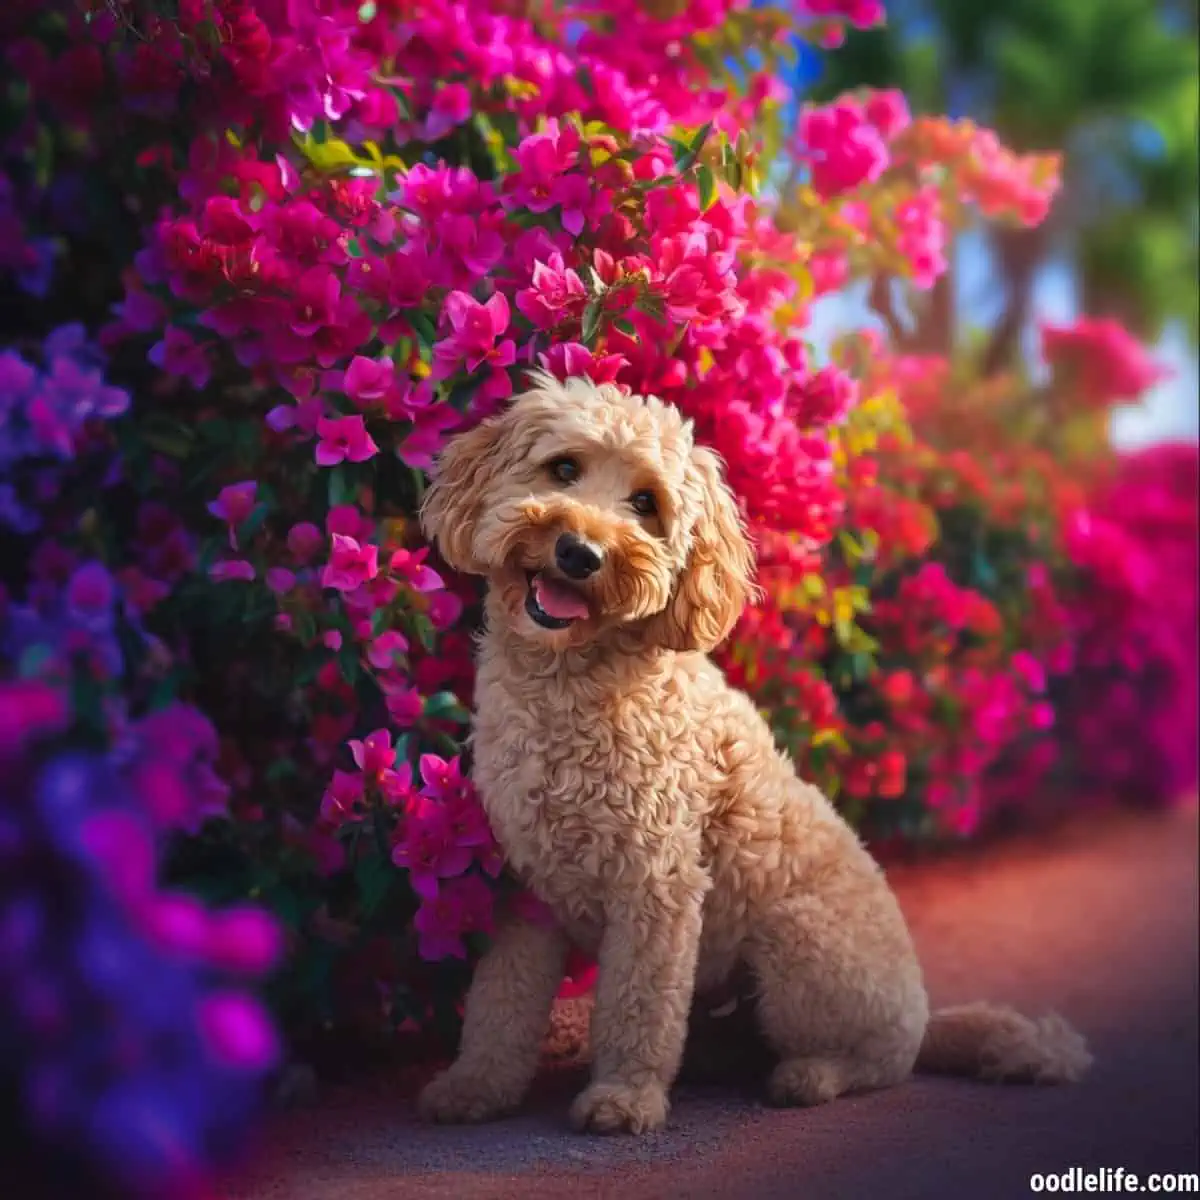 A Cockapoo GLOWING near some blooming bougainvillea